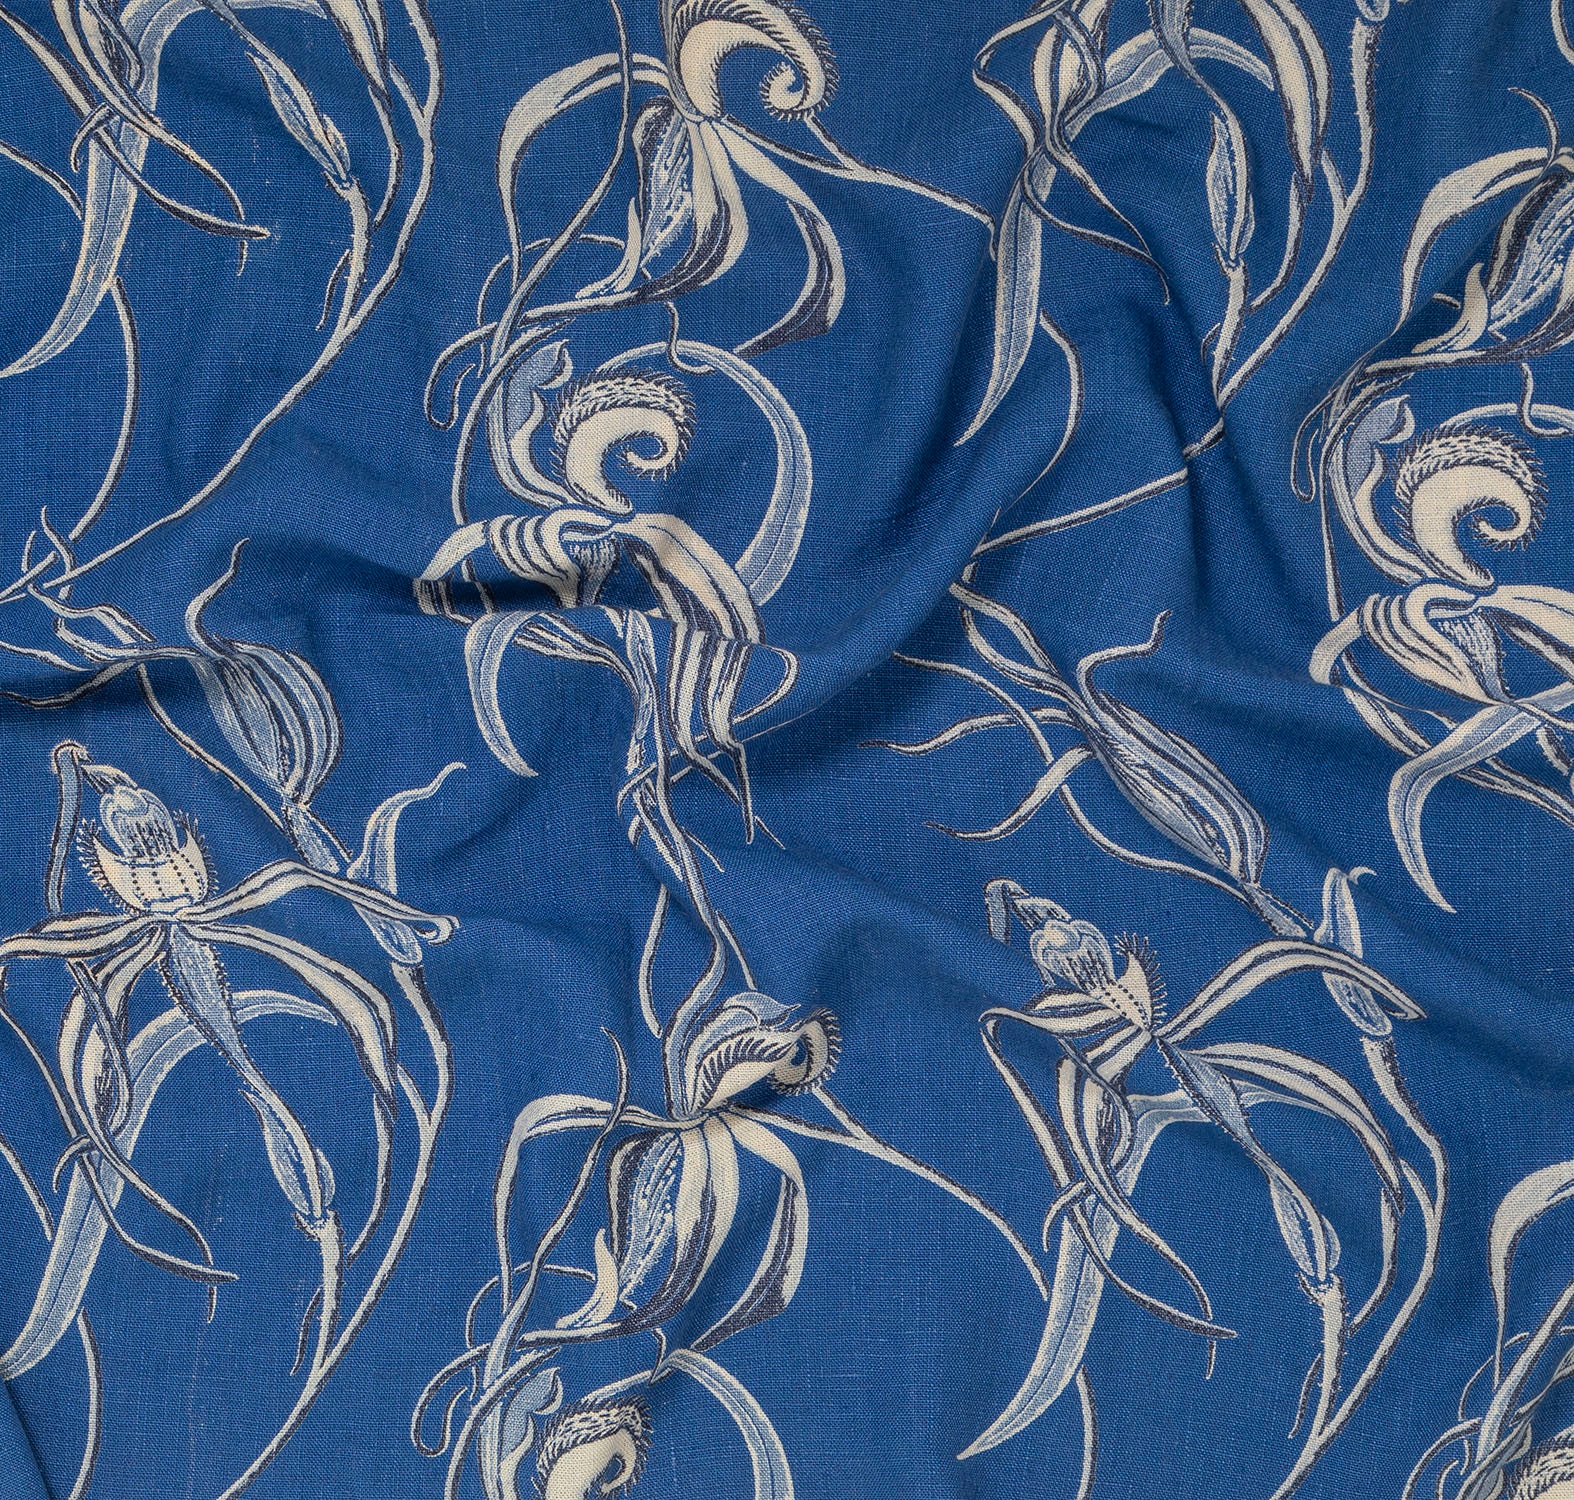 Draped fabric in a painterly orchid print in blue and yellow on a green field.